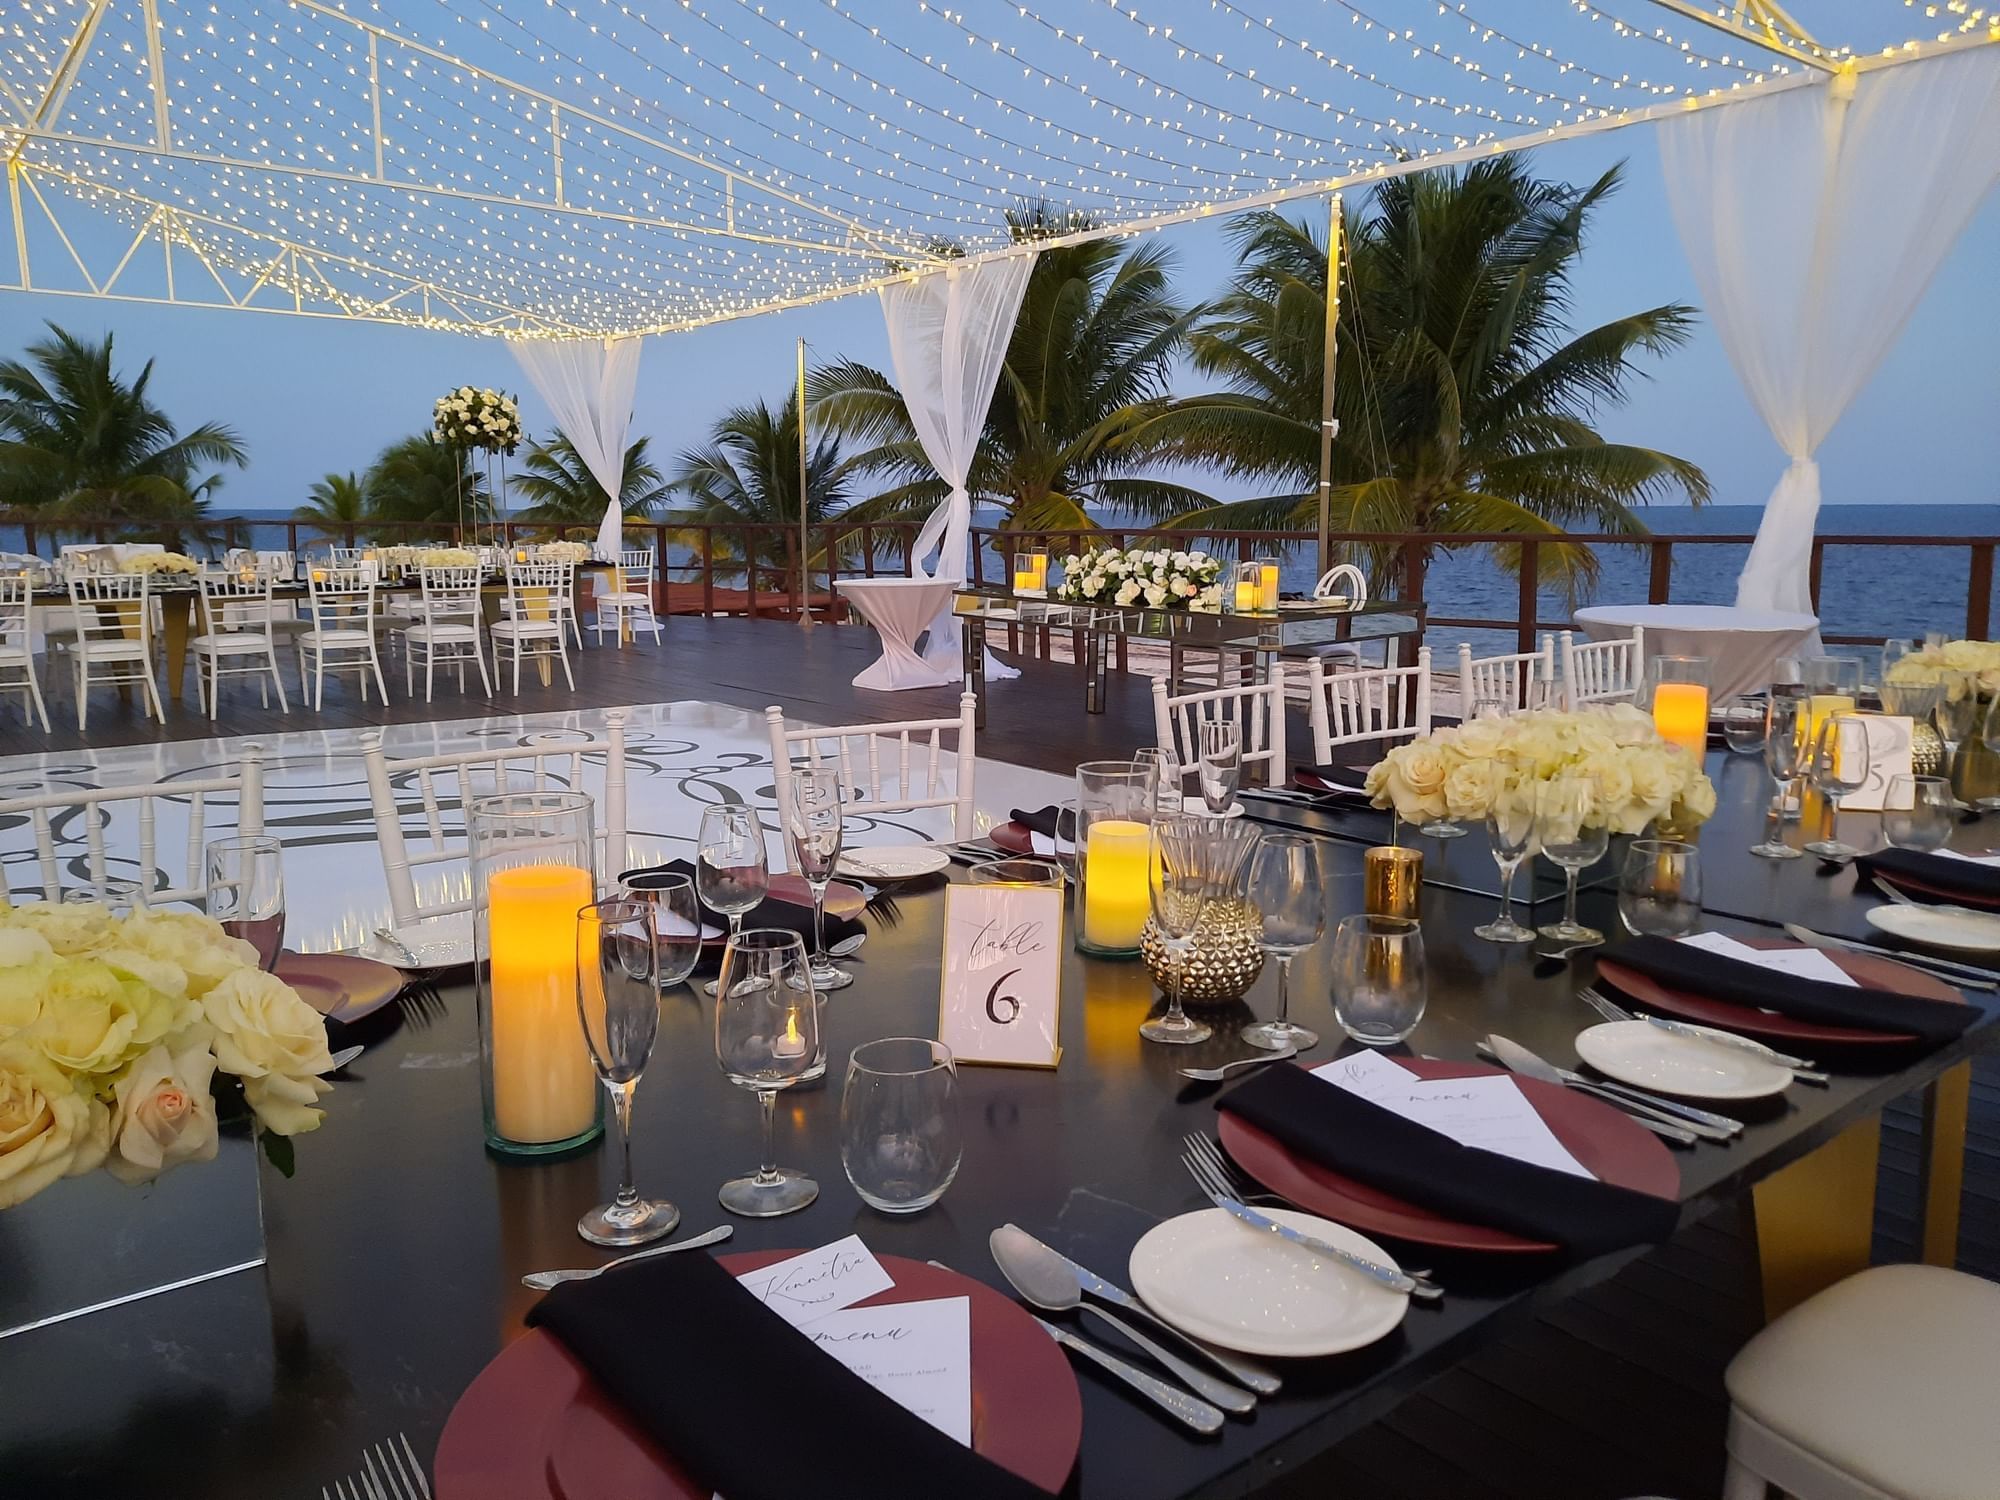 Banquet-style dining set-up with fresh flowers, candles & cutlery on vora deck at Haven Riviera Cancun